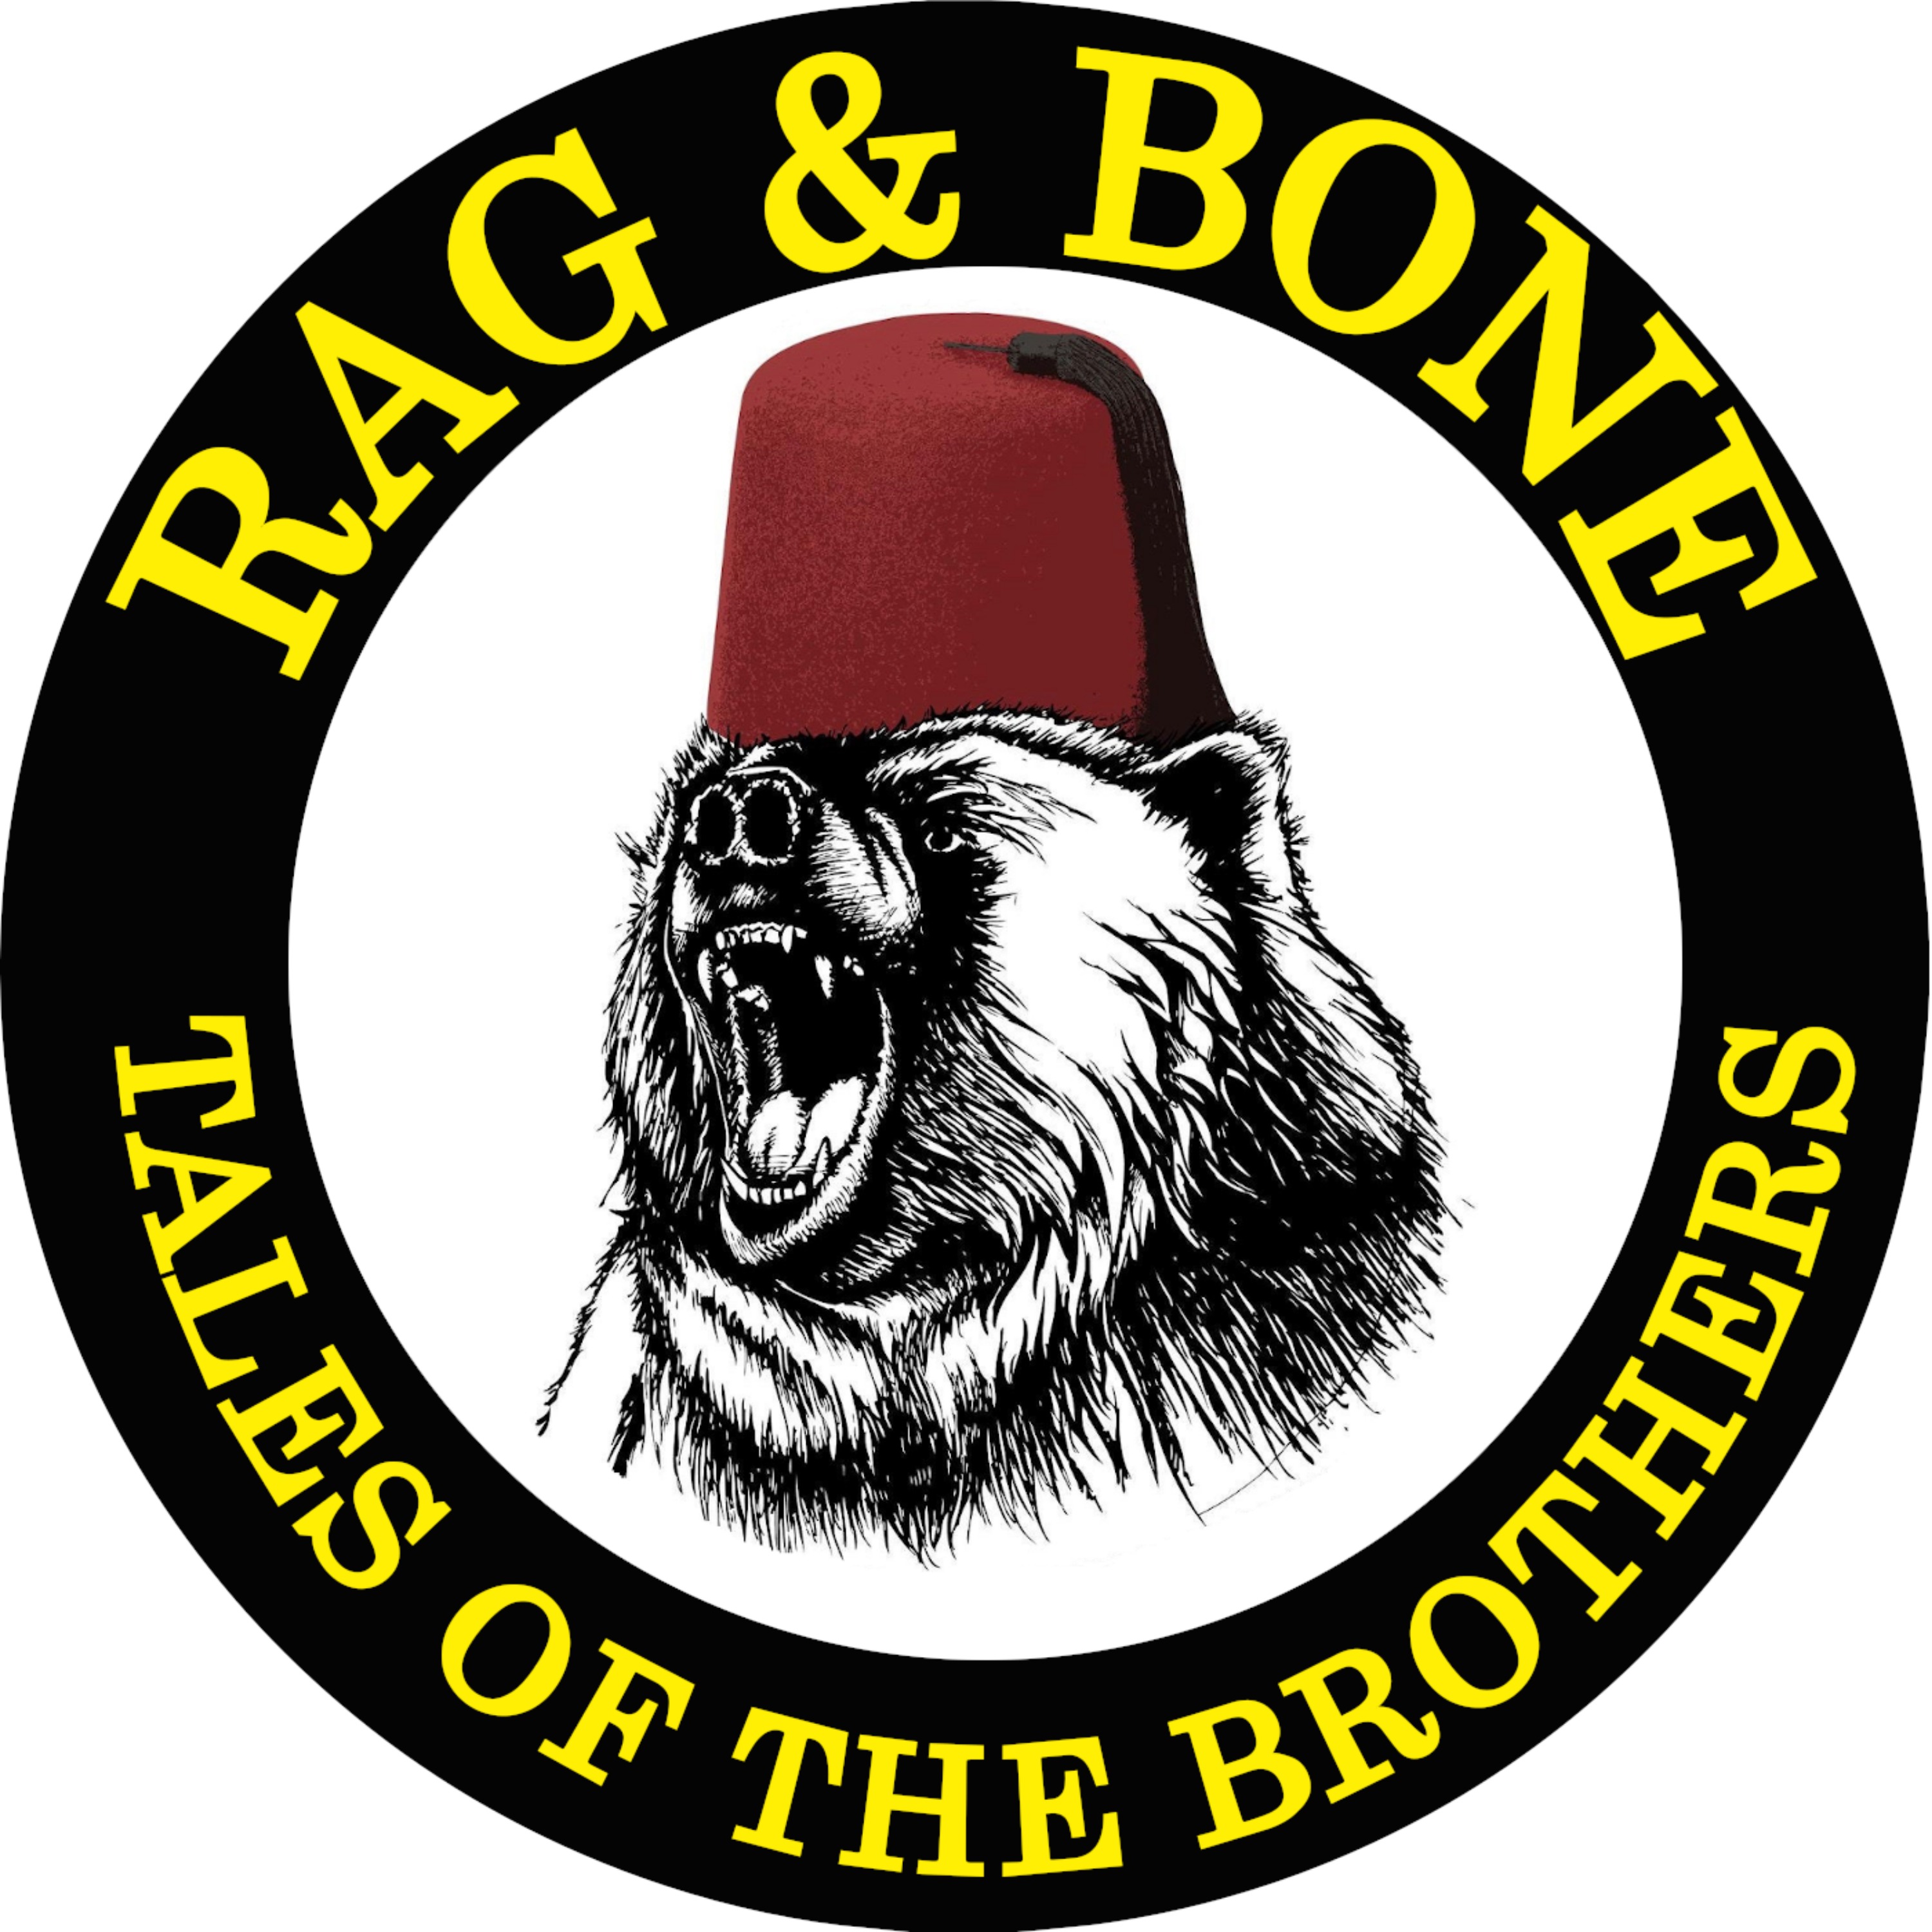 Tales of the brothers Rag & Bone